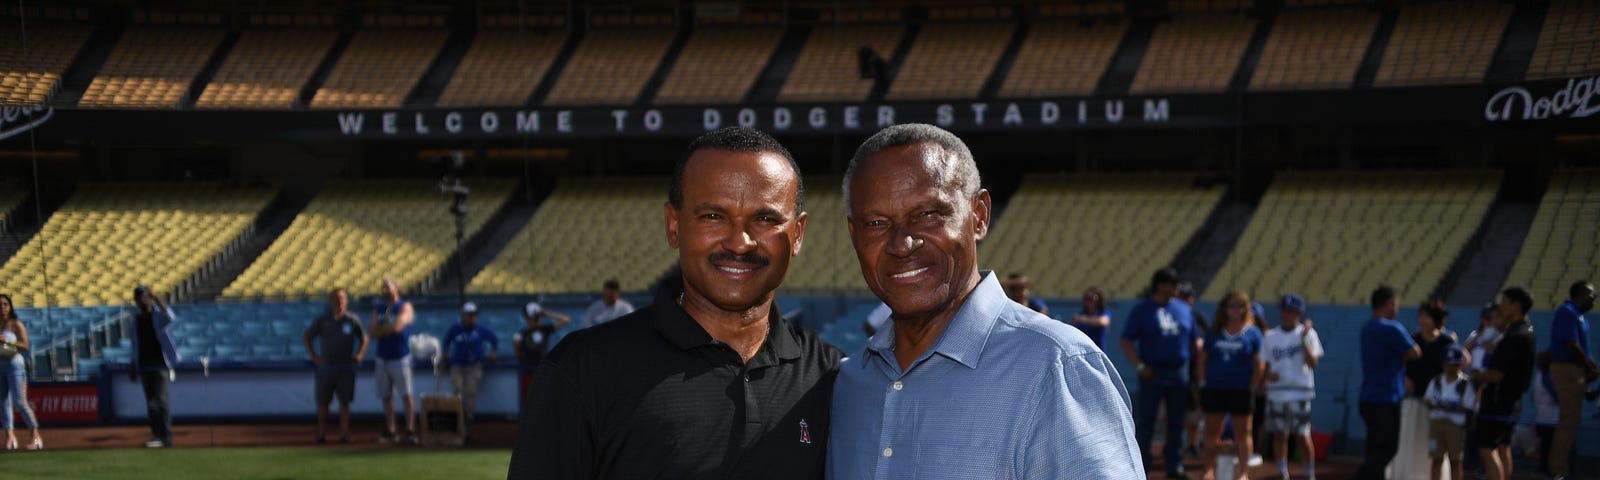 Mota and Hershiser will be the next Legends of Dodger Baseball, by Cary  Osborne